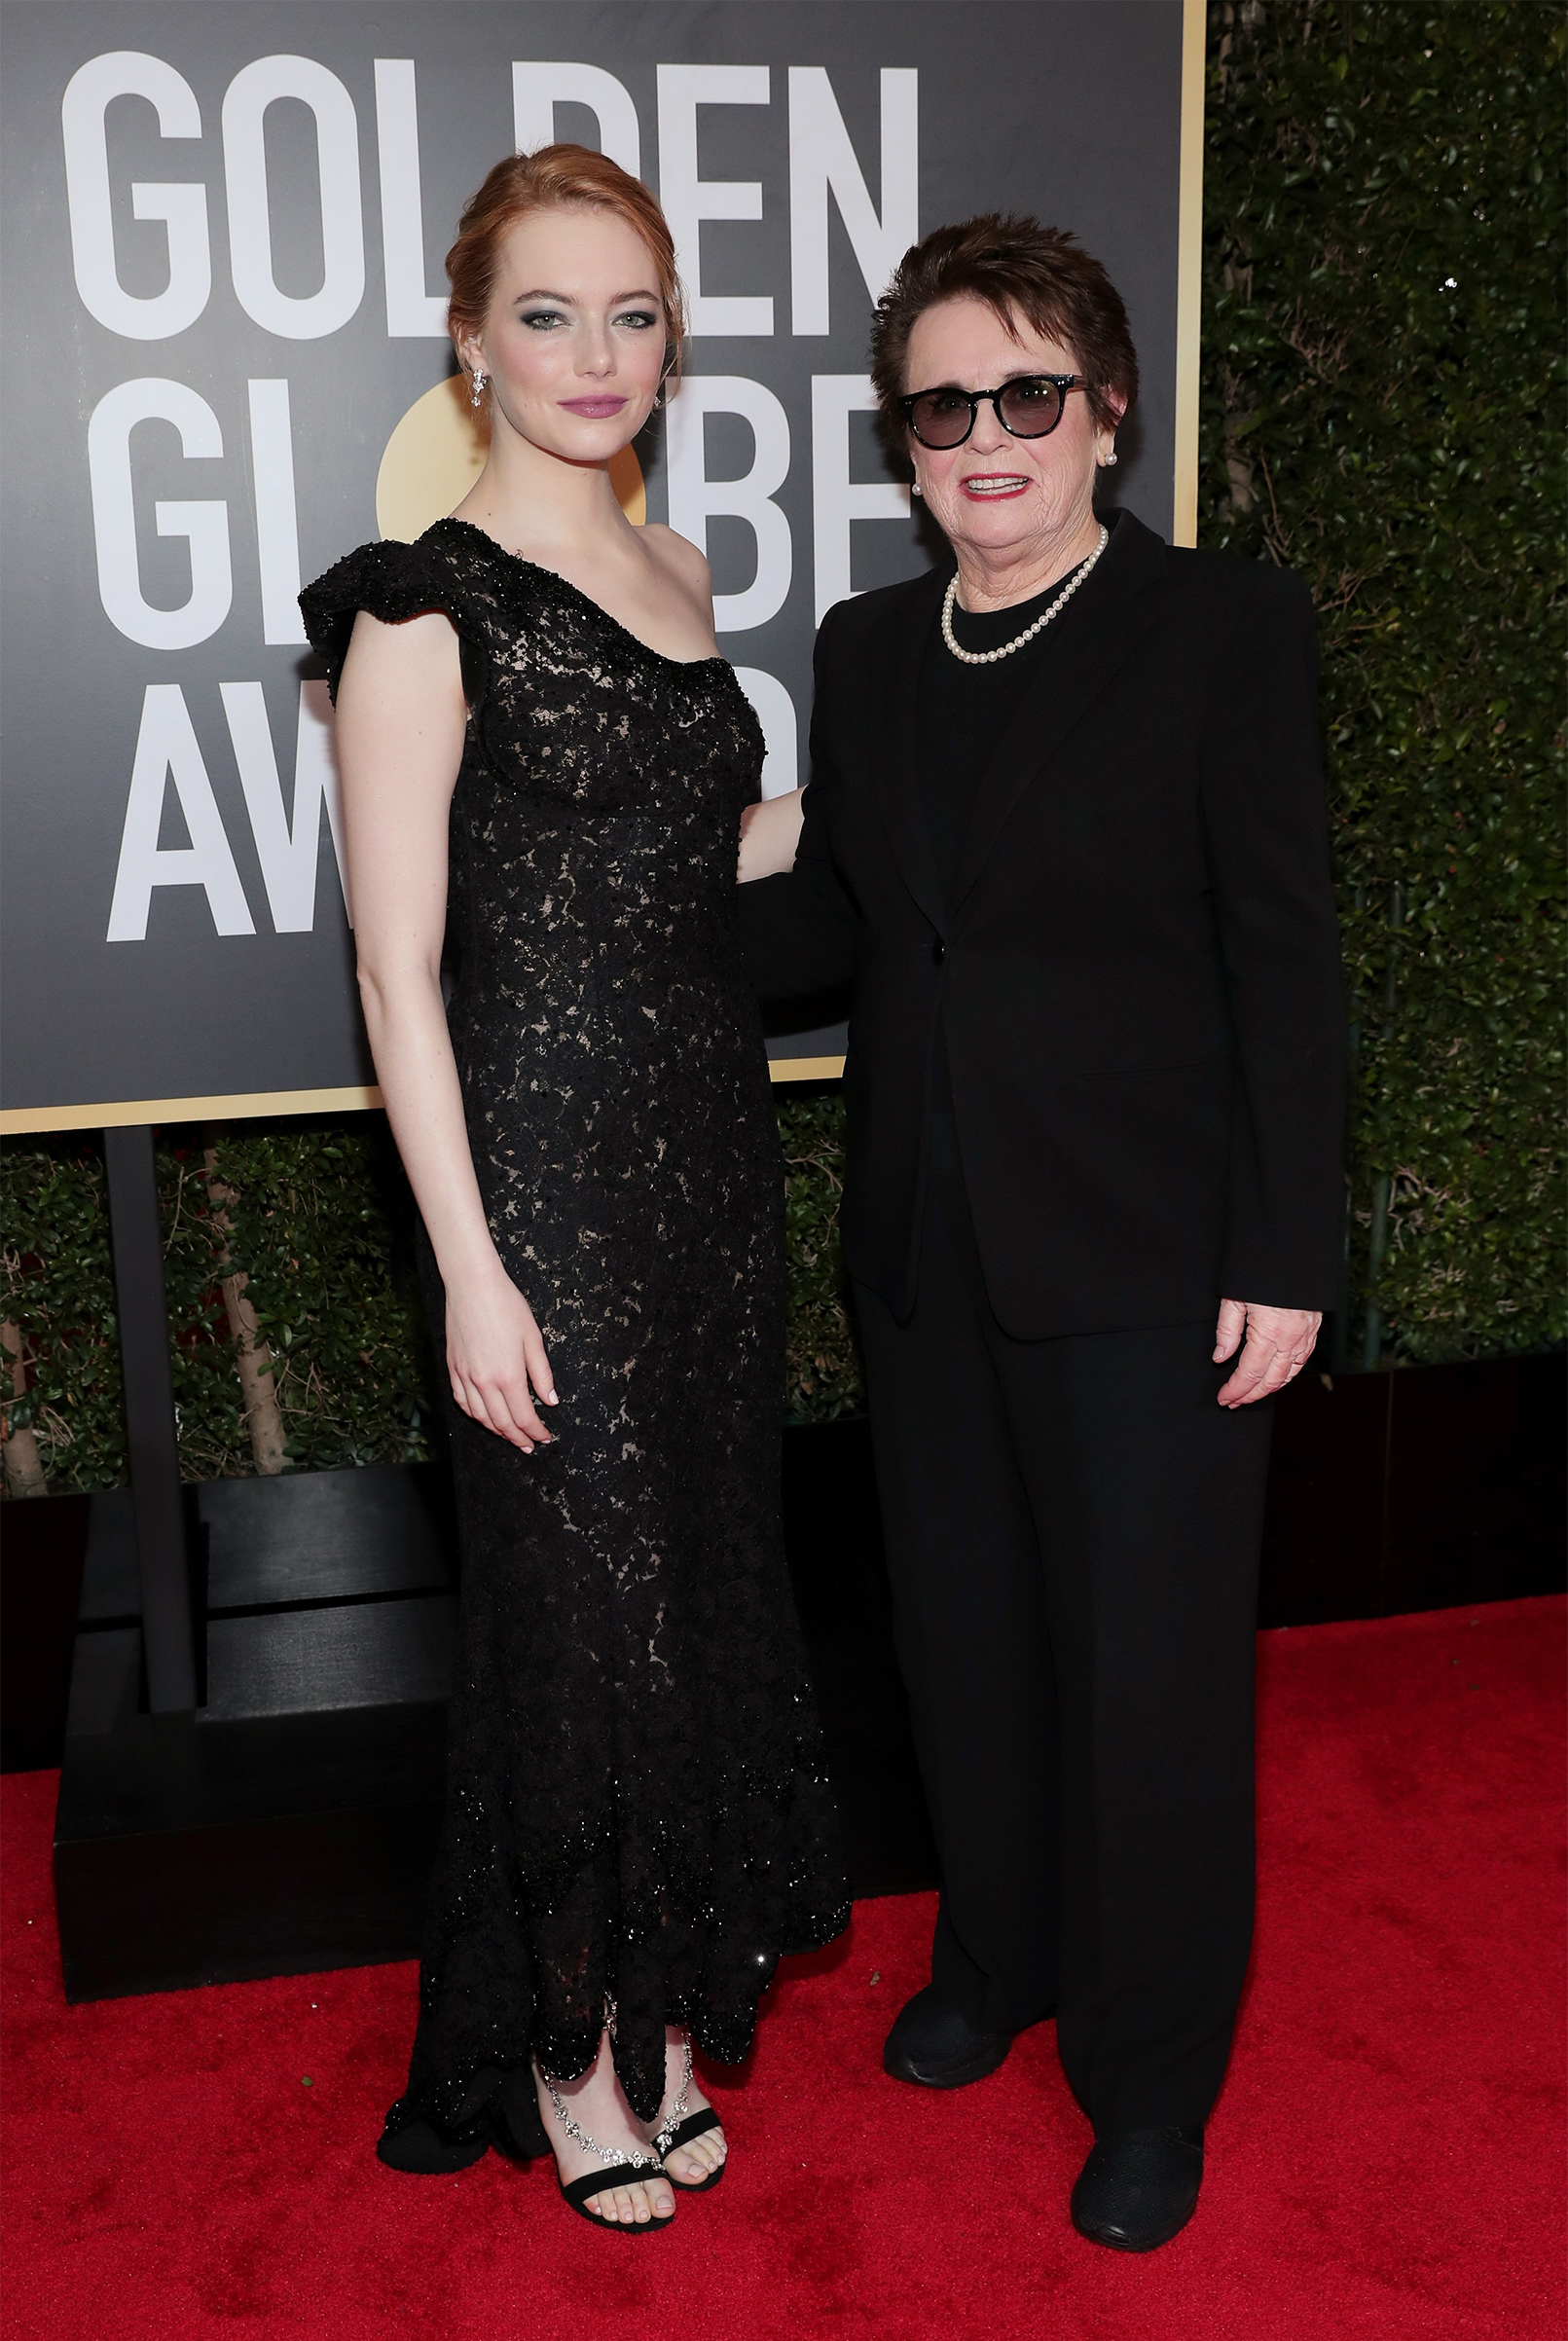 Actor Emma Stone and tennis player Billie Jean King arrive to the 75th Annual Golden Globe Awards held at the Beverly Hilton Hotel on Jan. 7, 2018. (Neilson Barnard—NBC/Getty Images)